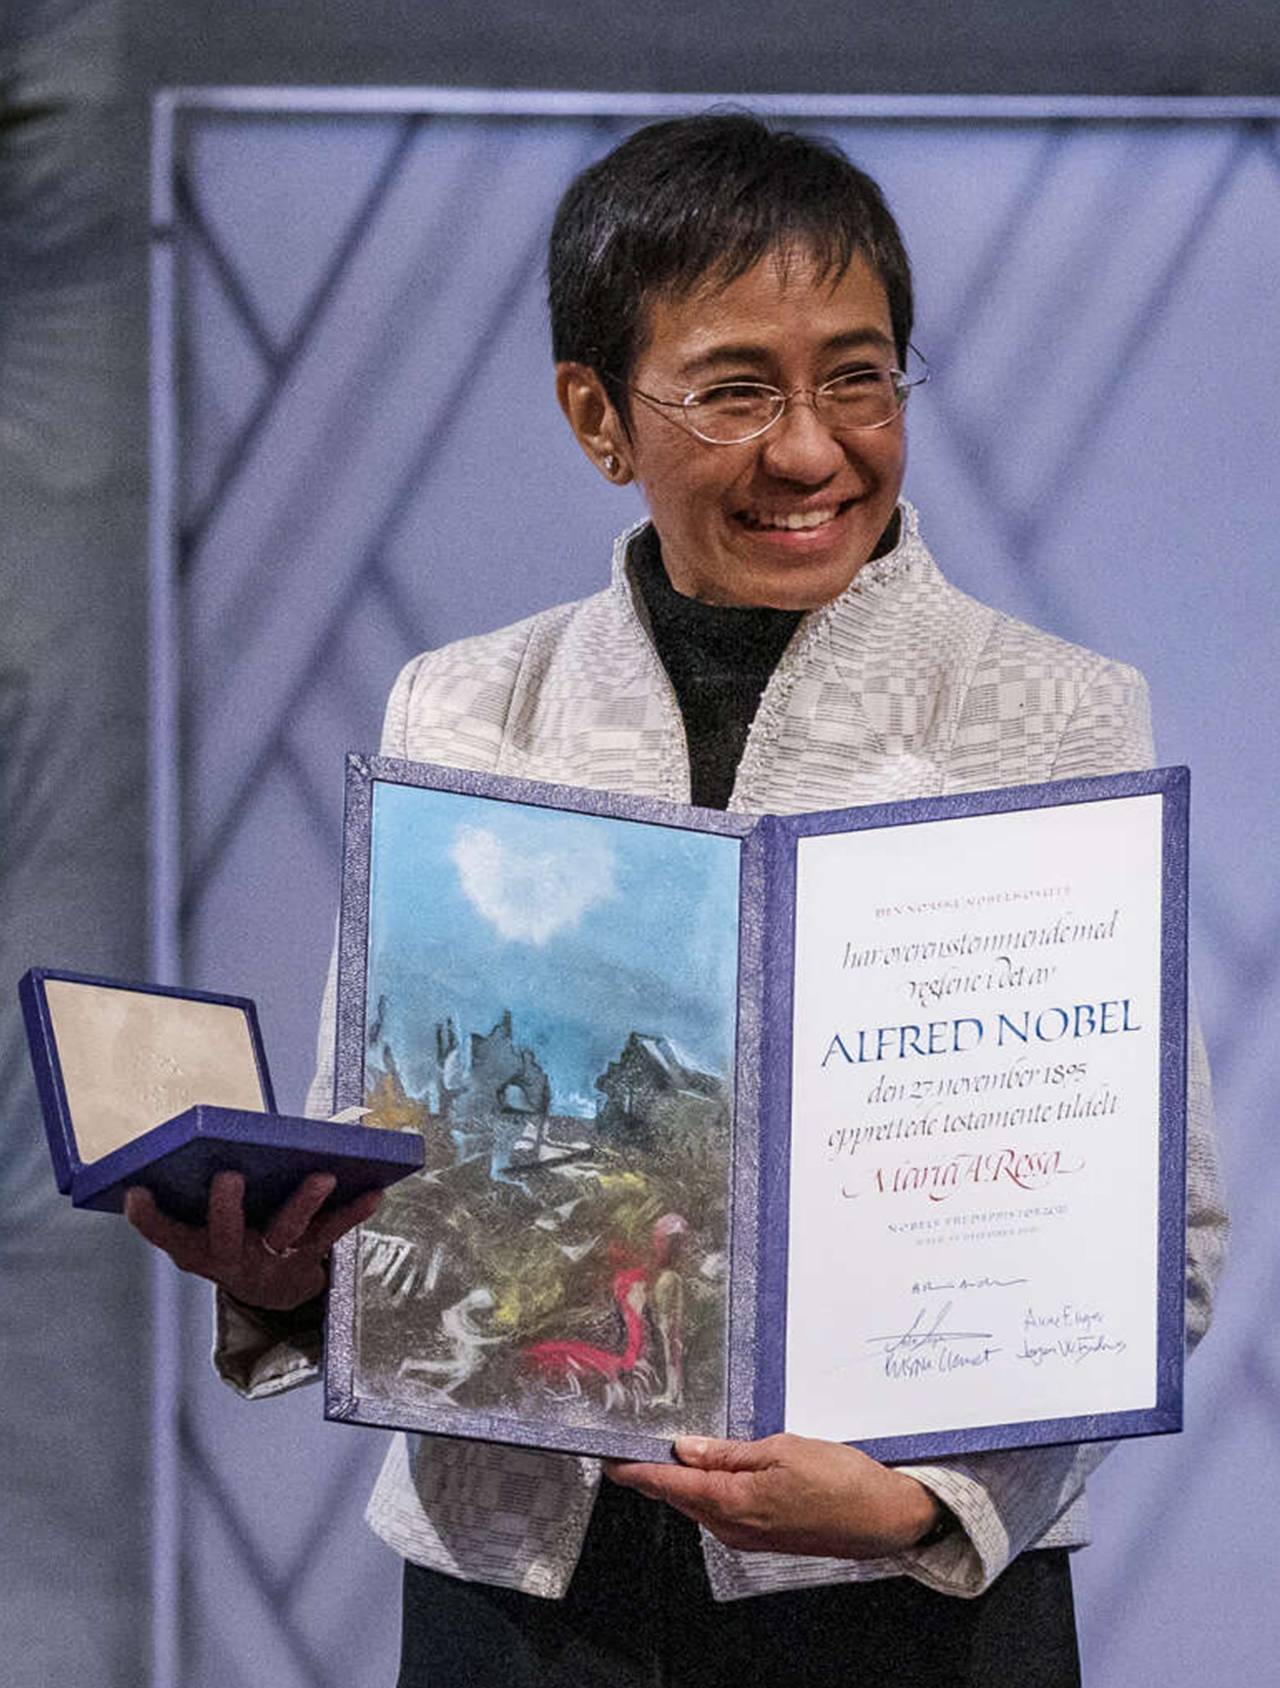 Maria Ressa receiving the Noble Prize